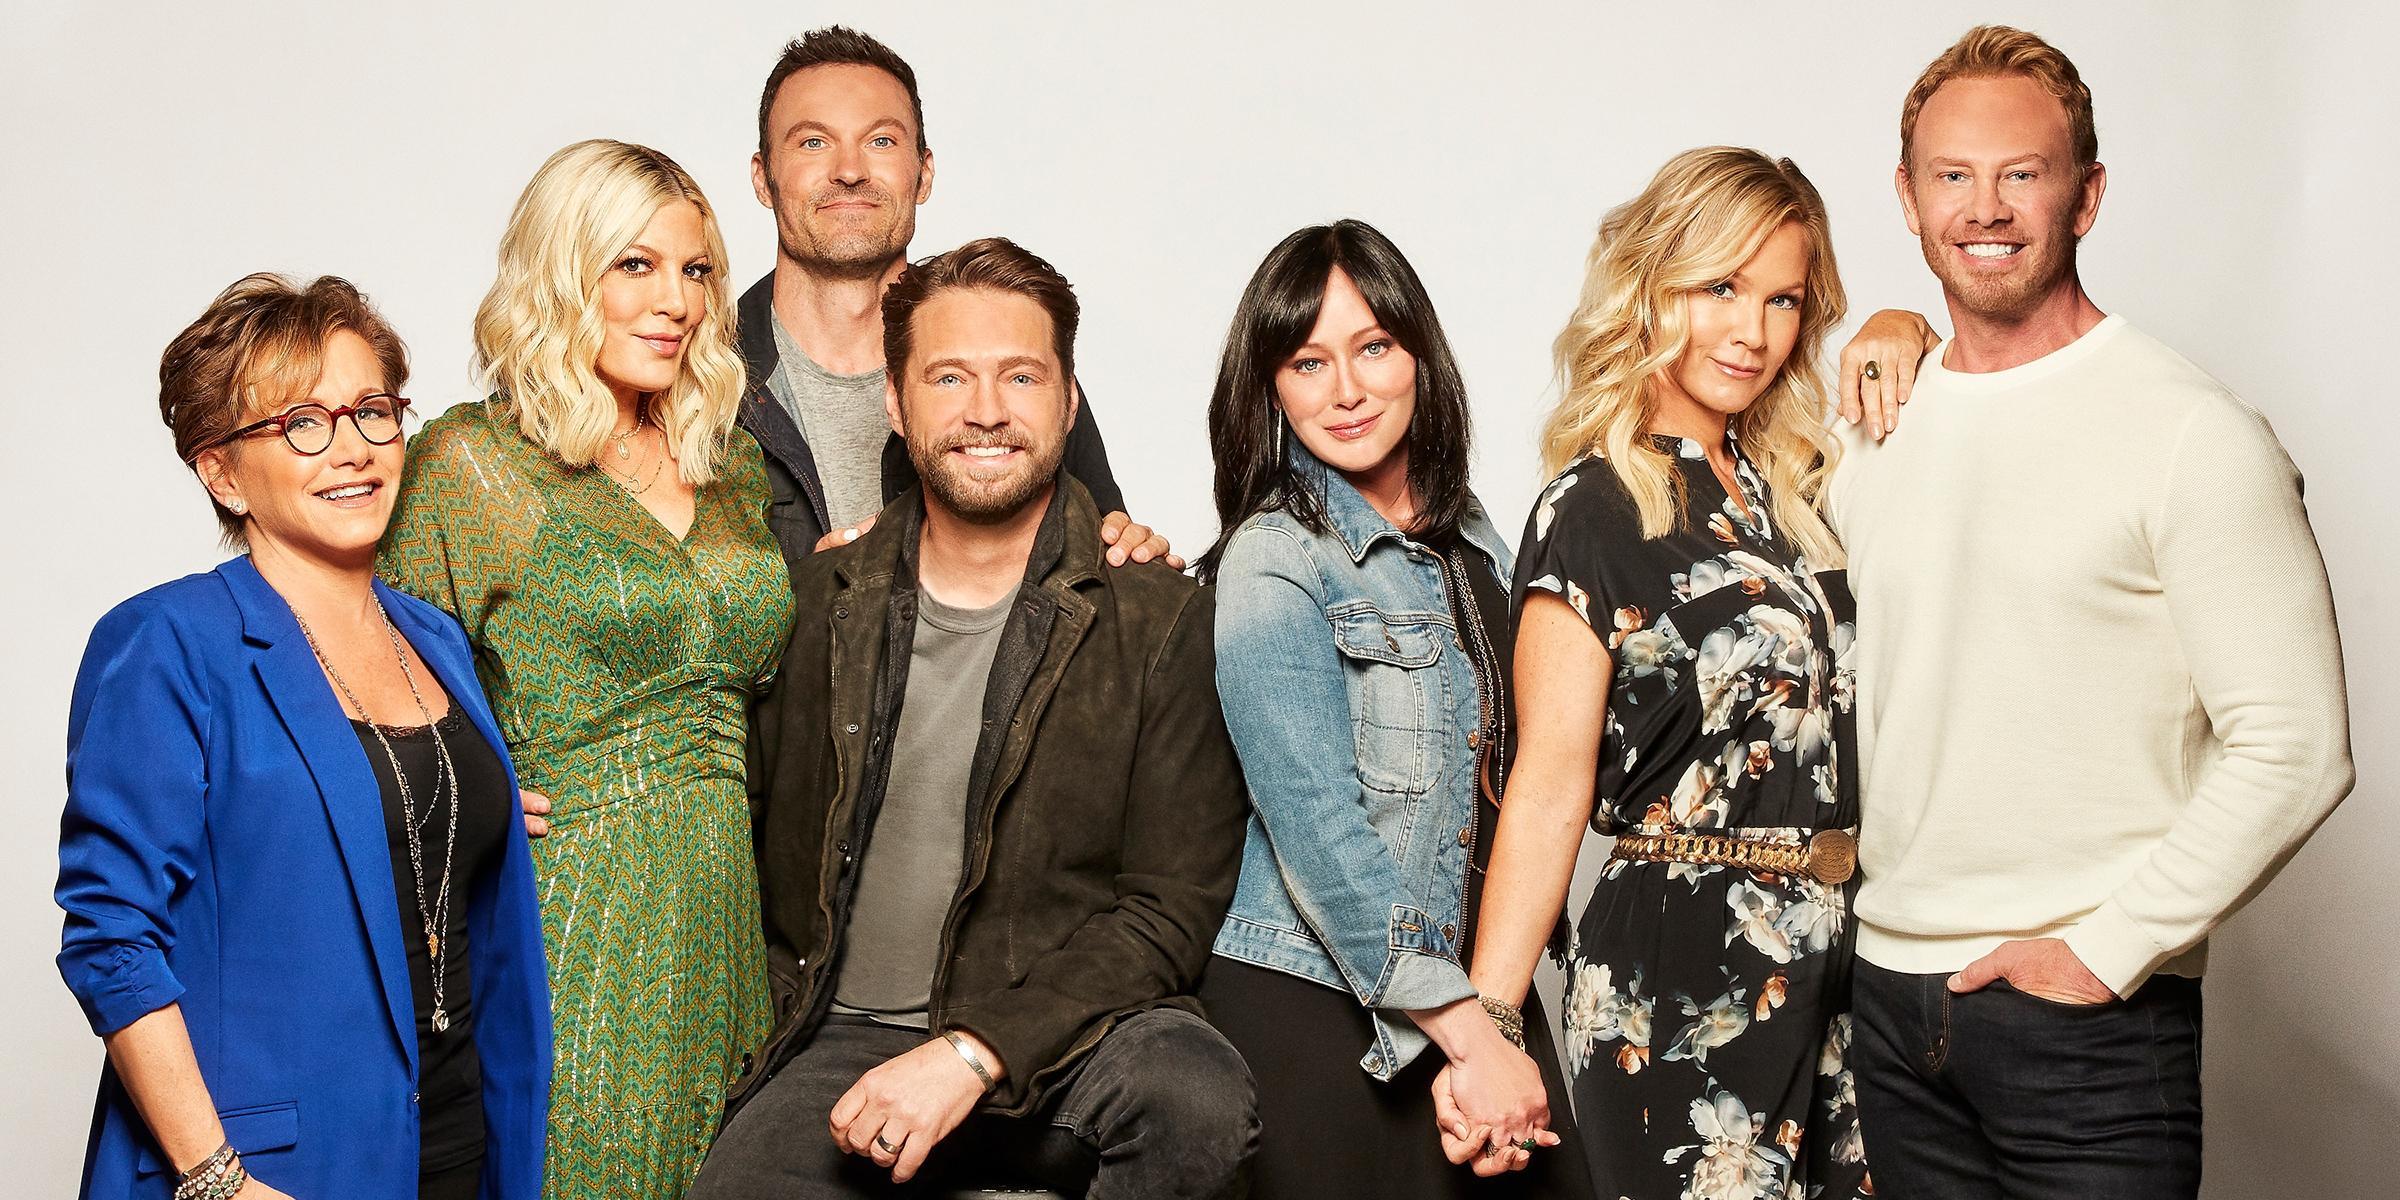 Watch 'Beverly Hills, 90210' cast describe the reboot in new promo